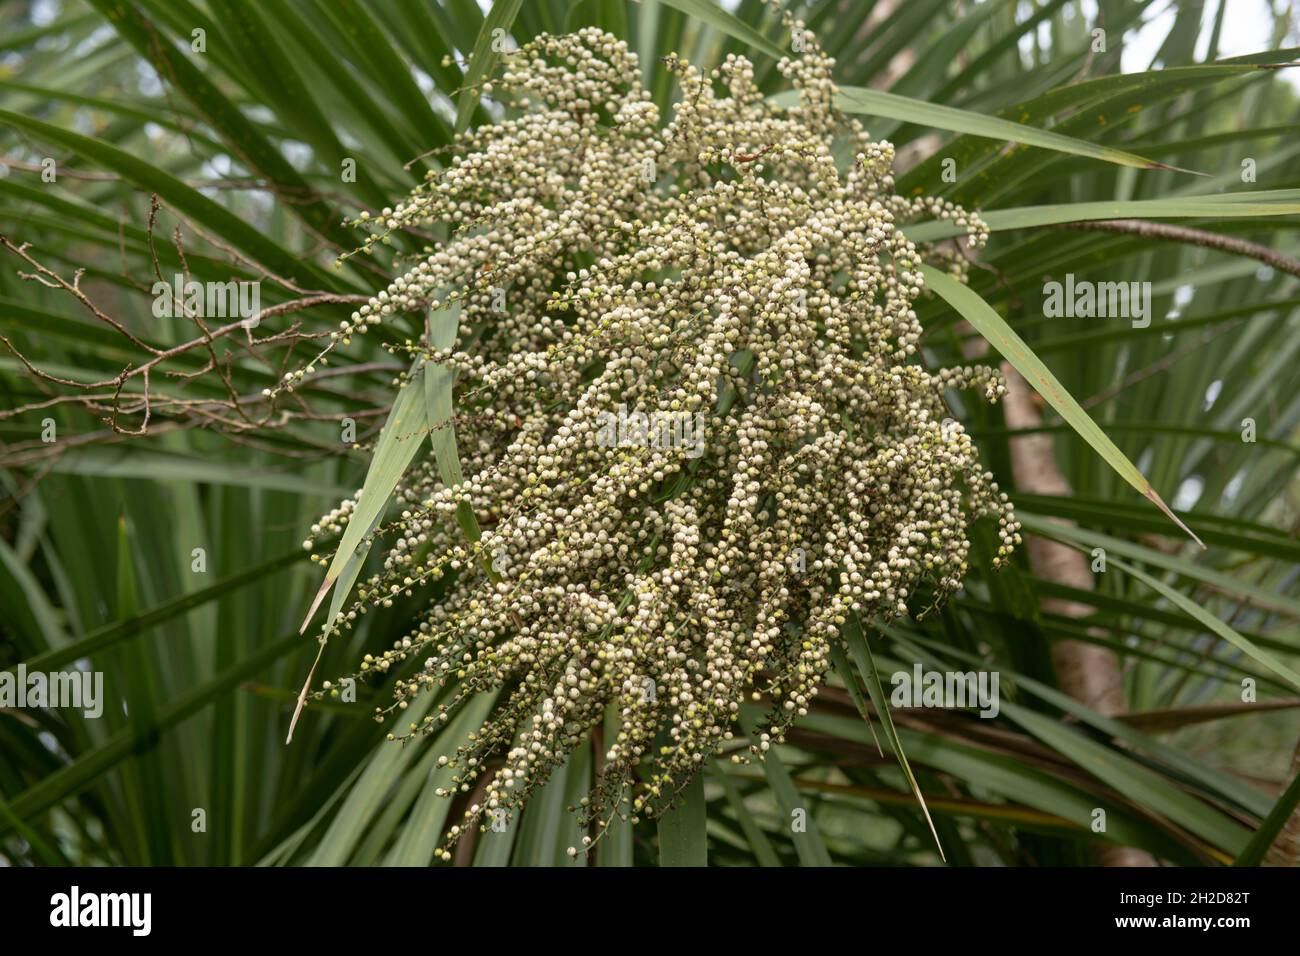 Close Up of the Autumn Flowering Cream Flowers on a New Zealand Cabbage Palm (Cordyline australis) Growing in a Garden in Rural Devon, England, UK Stock Photo